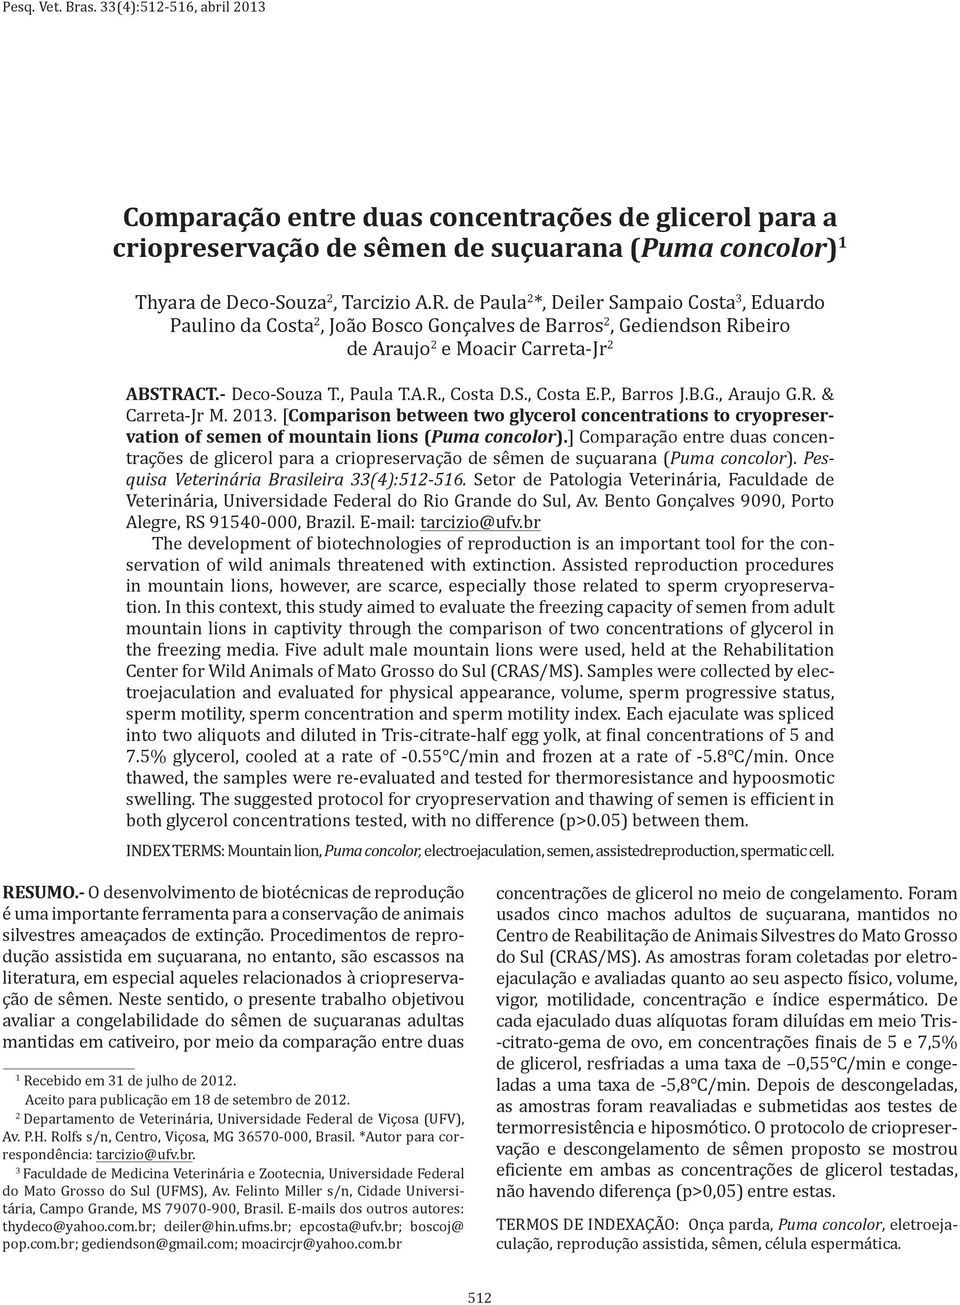 S., Costa E.P., Barros J.B.G., Araujo G.R. & Carreta-Jr M. 2013. [Comparison between two glycerol concentrations to cryopreservation of semen of mountain lions (Puma concolor).